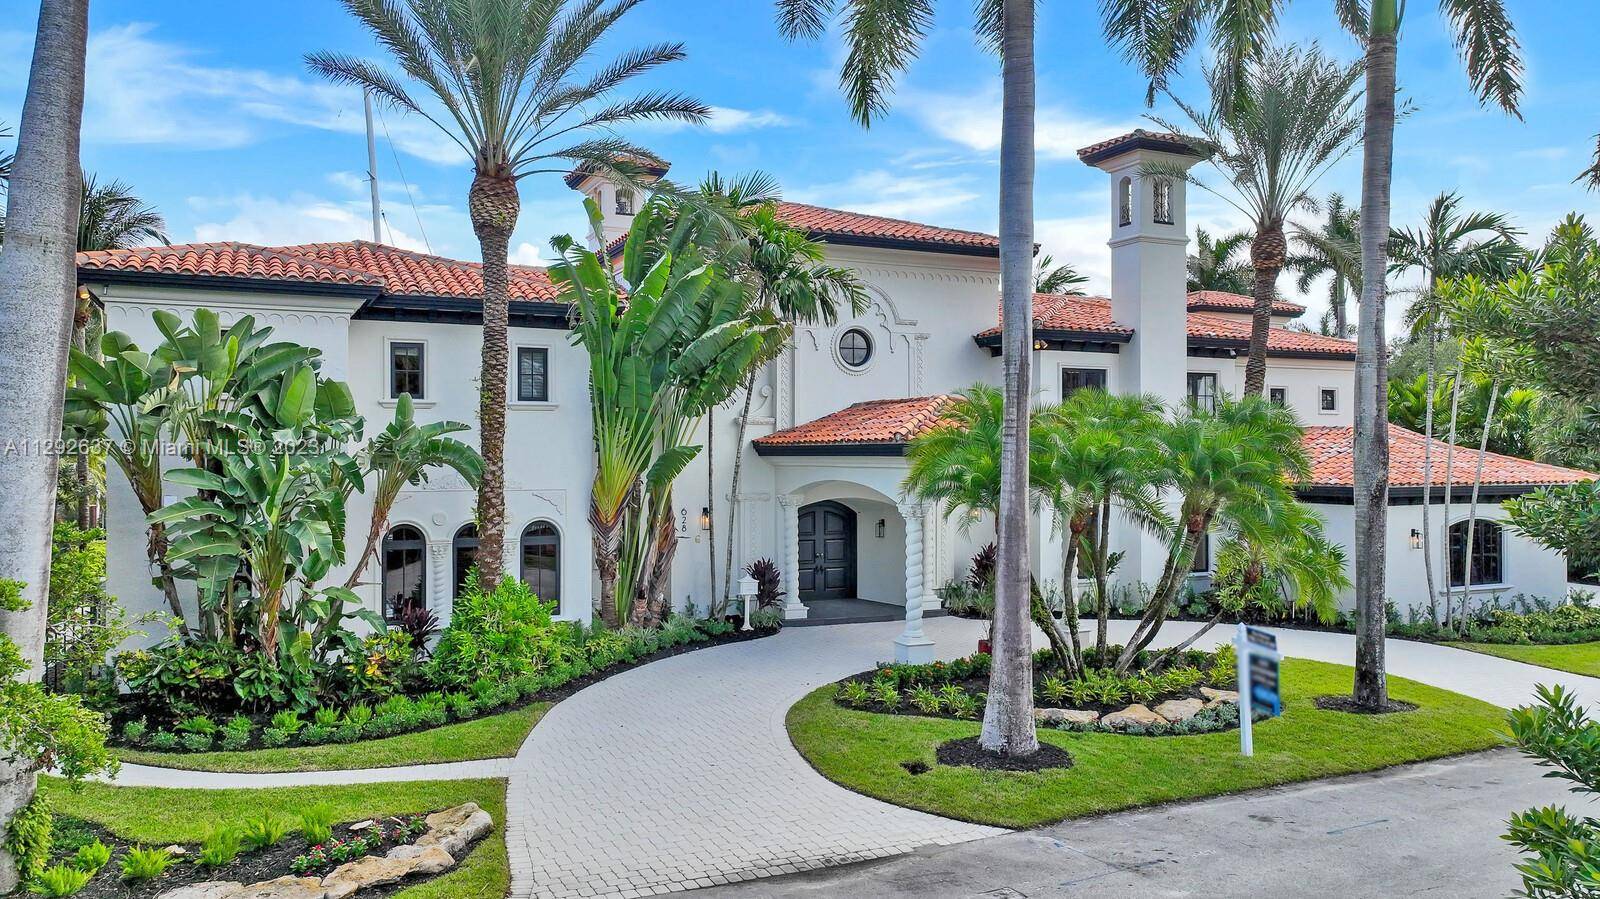 Newly remodeled Euro modern design combines elegance of Palm Beach mansion with practicality, comfort livability of Fort Lauderdale waterfront estate.